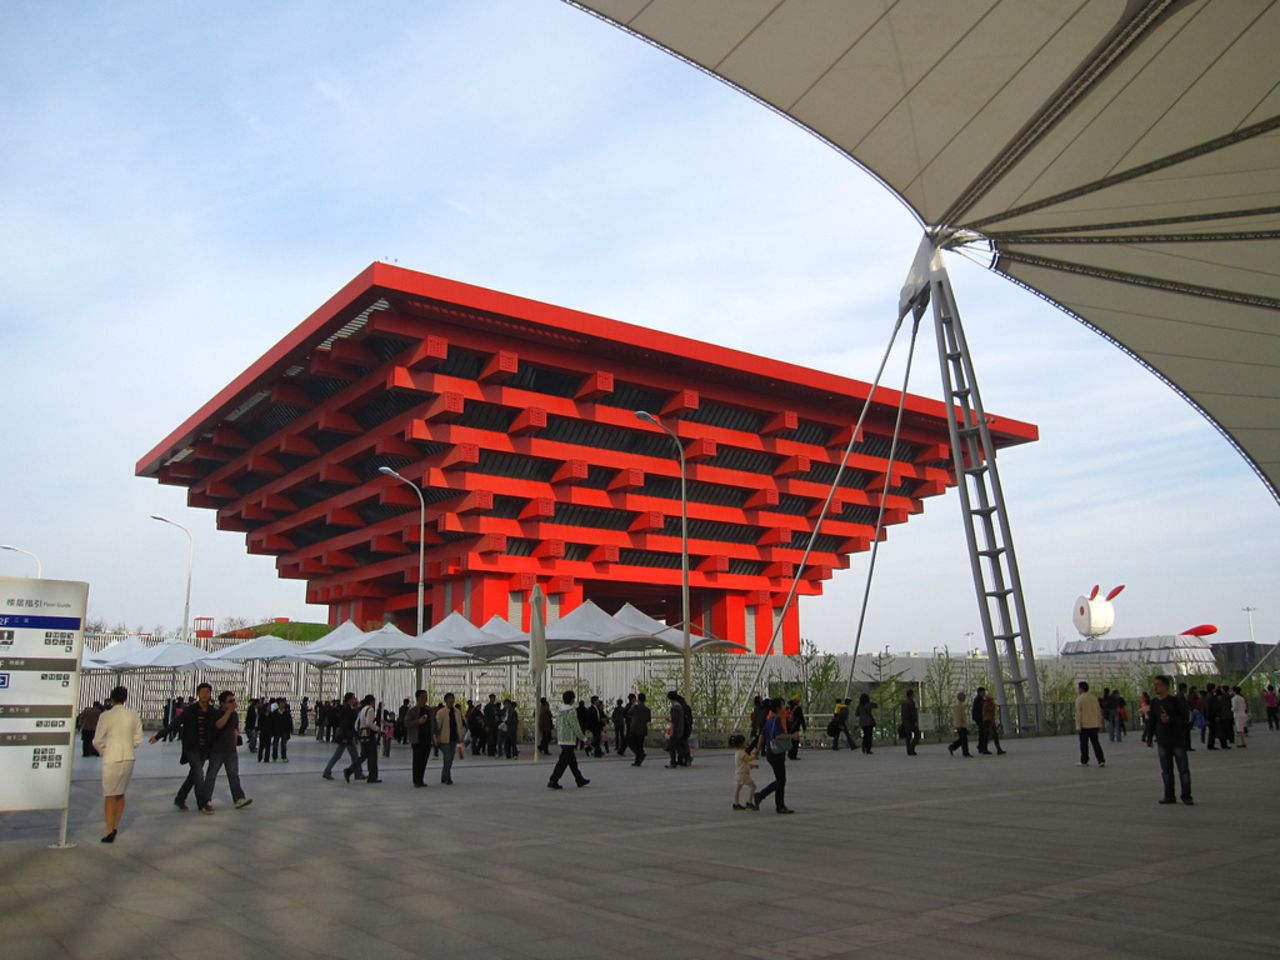 The China Art Palace was converted from the Chinese Pavilion at the Shanghai World Expo 2010.